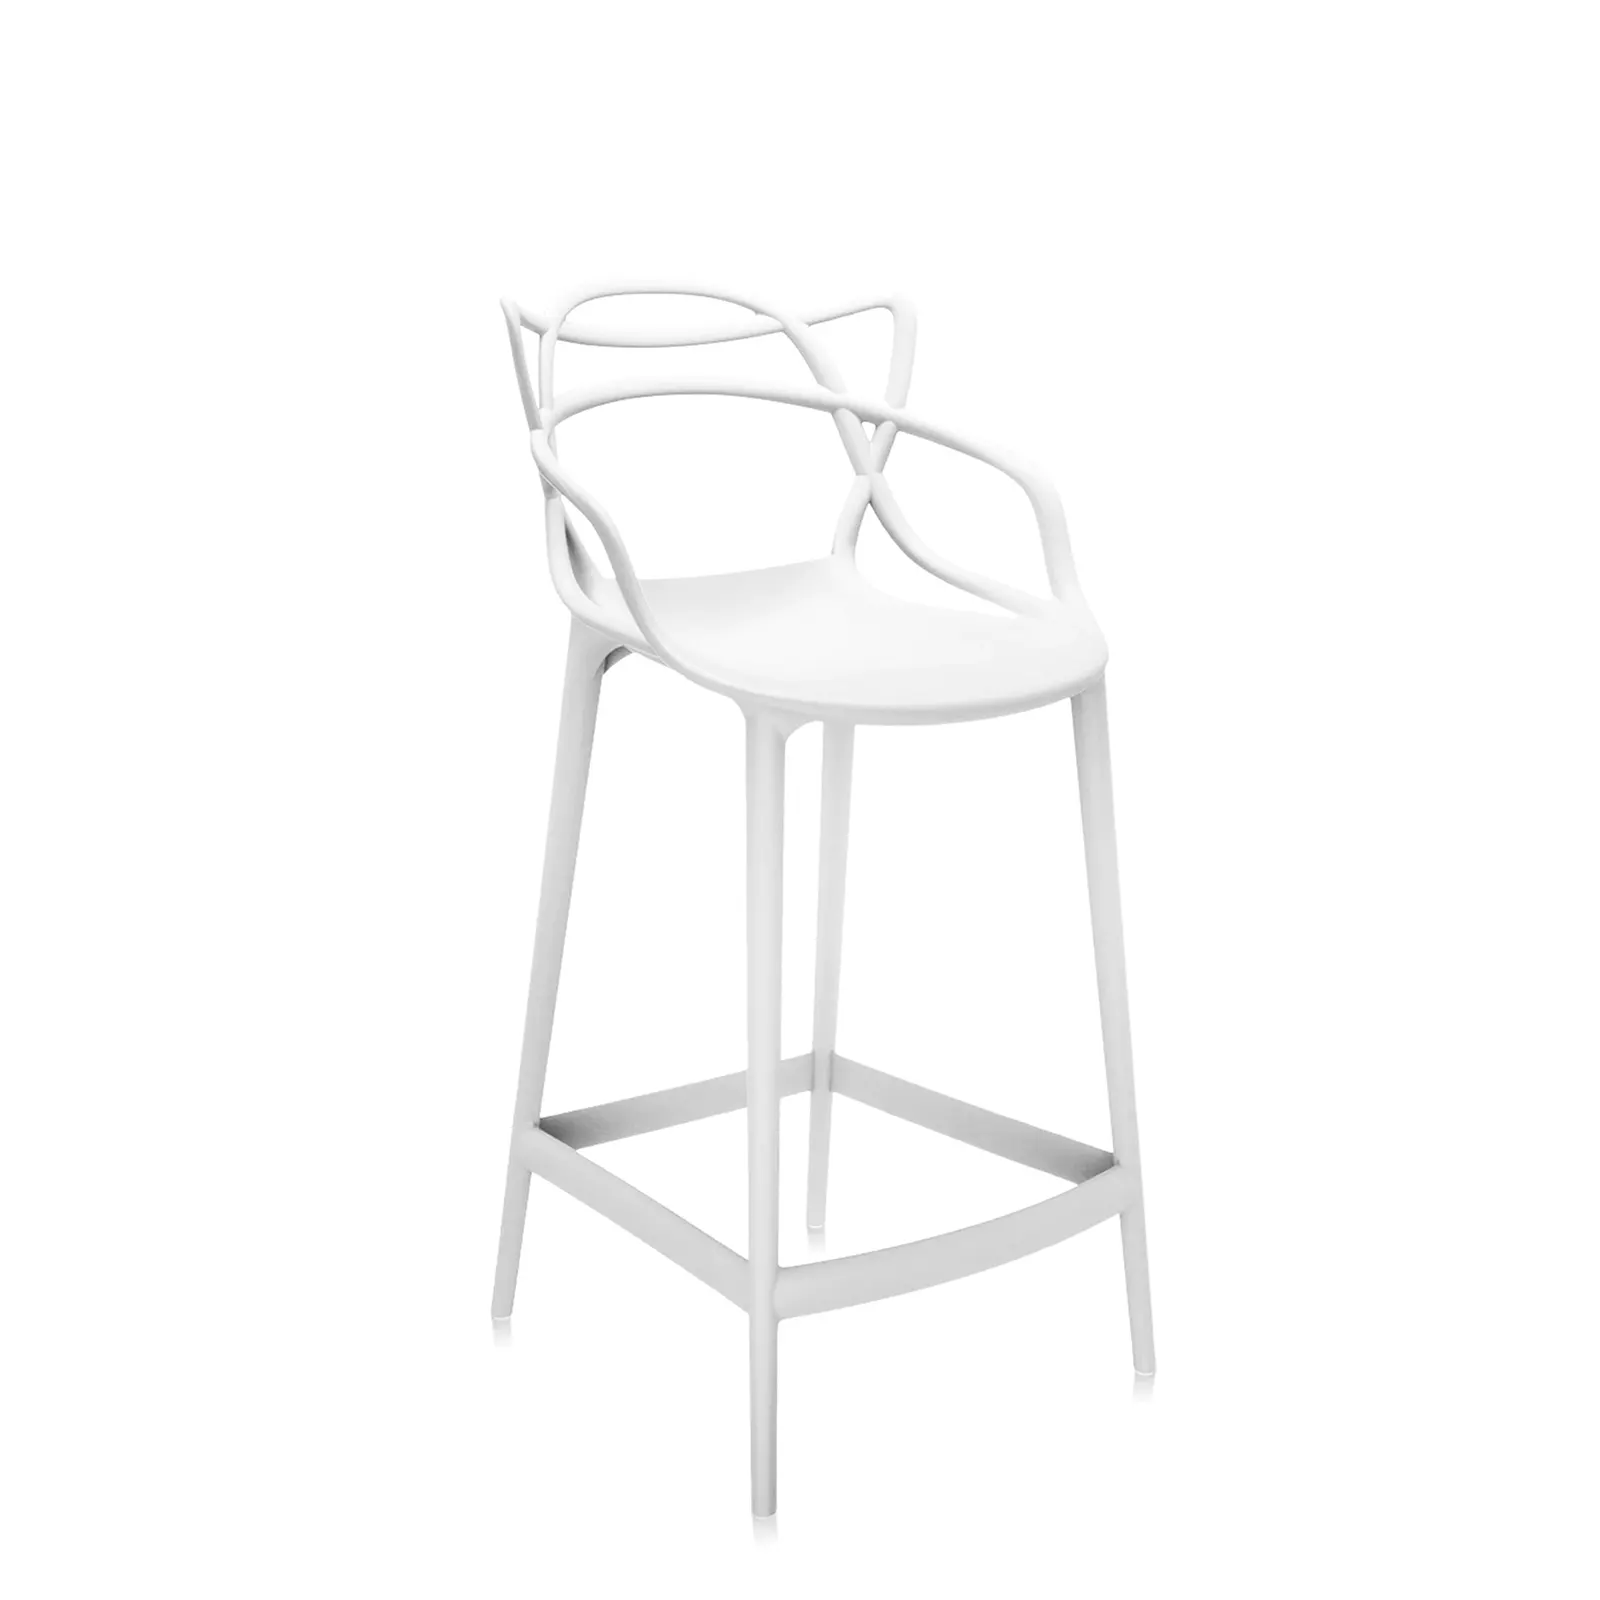 MASTERS STOOL H.75 COLOR BLANCO 05868/03